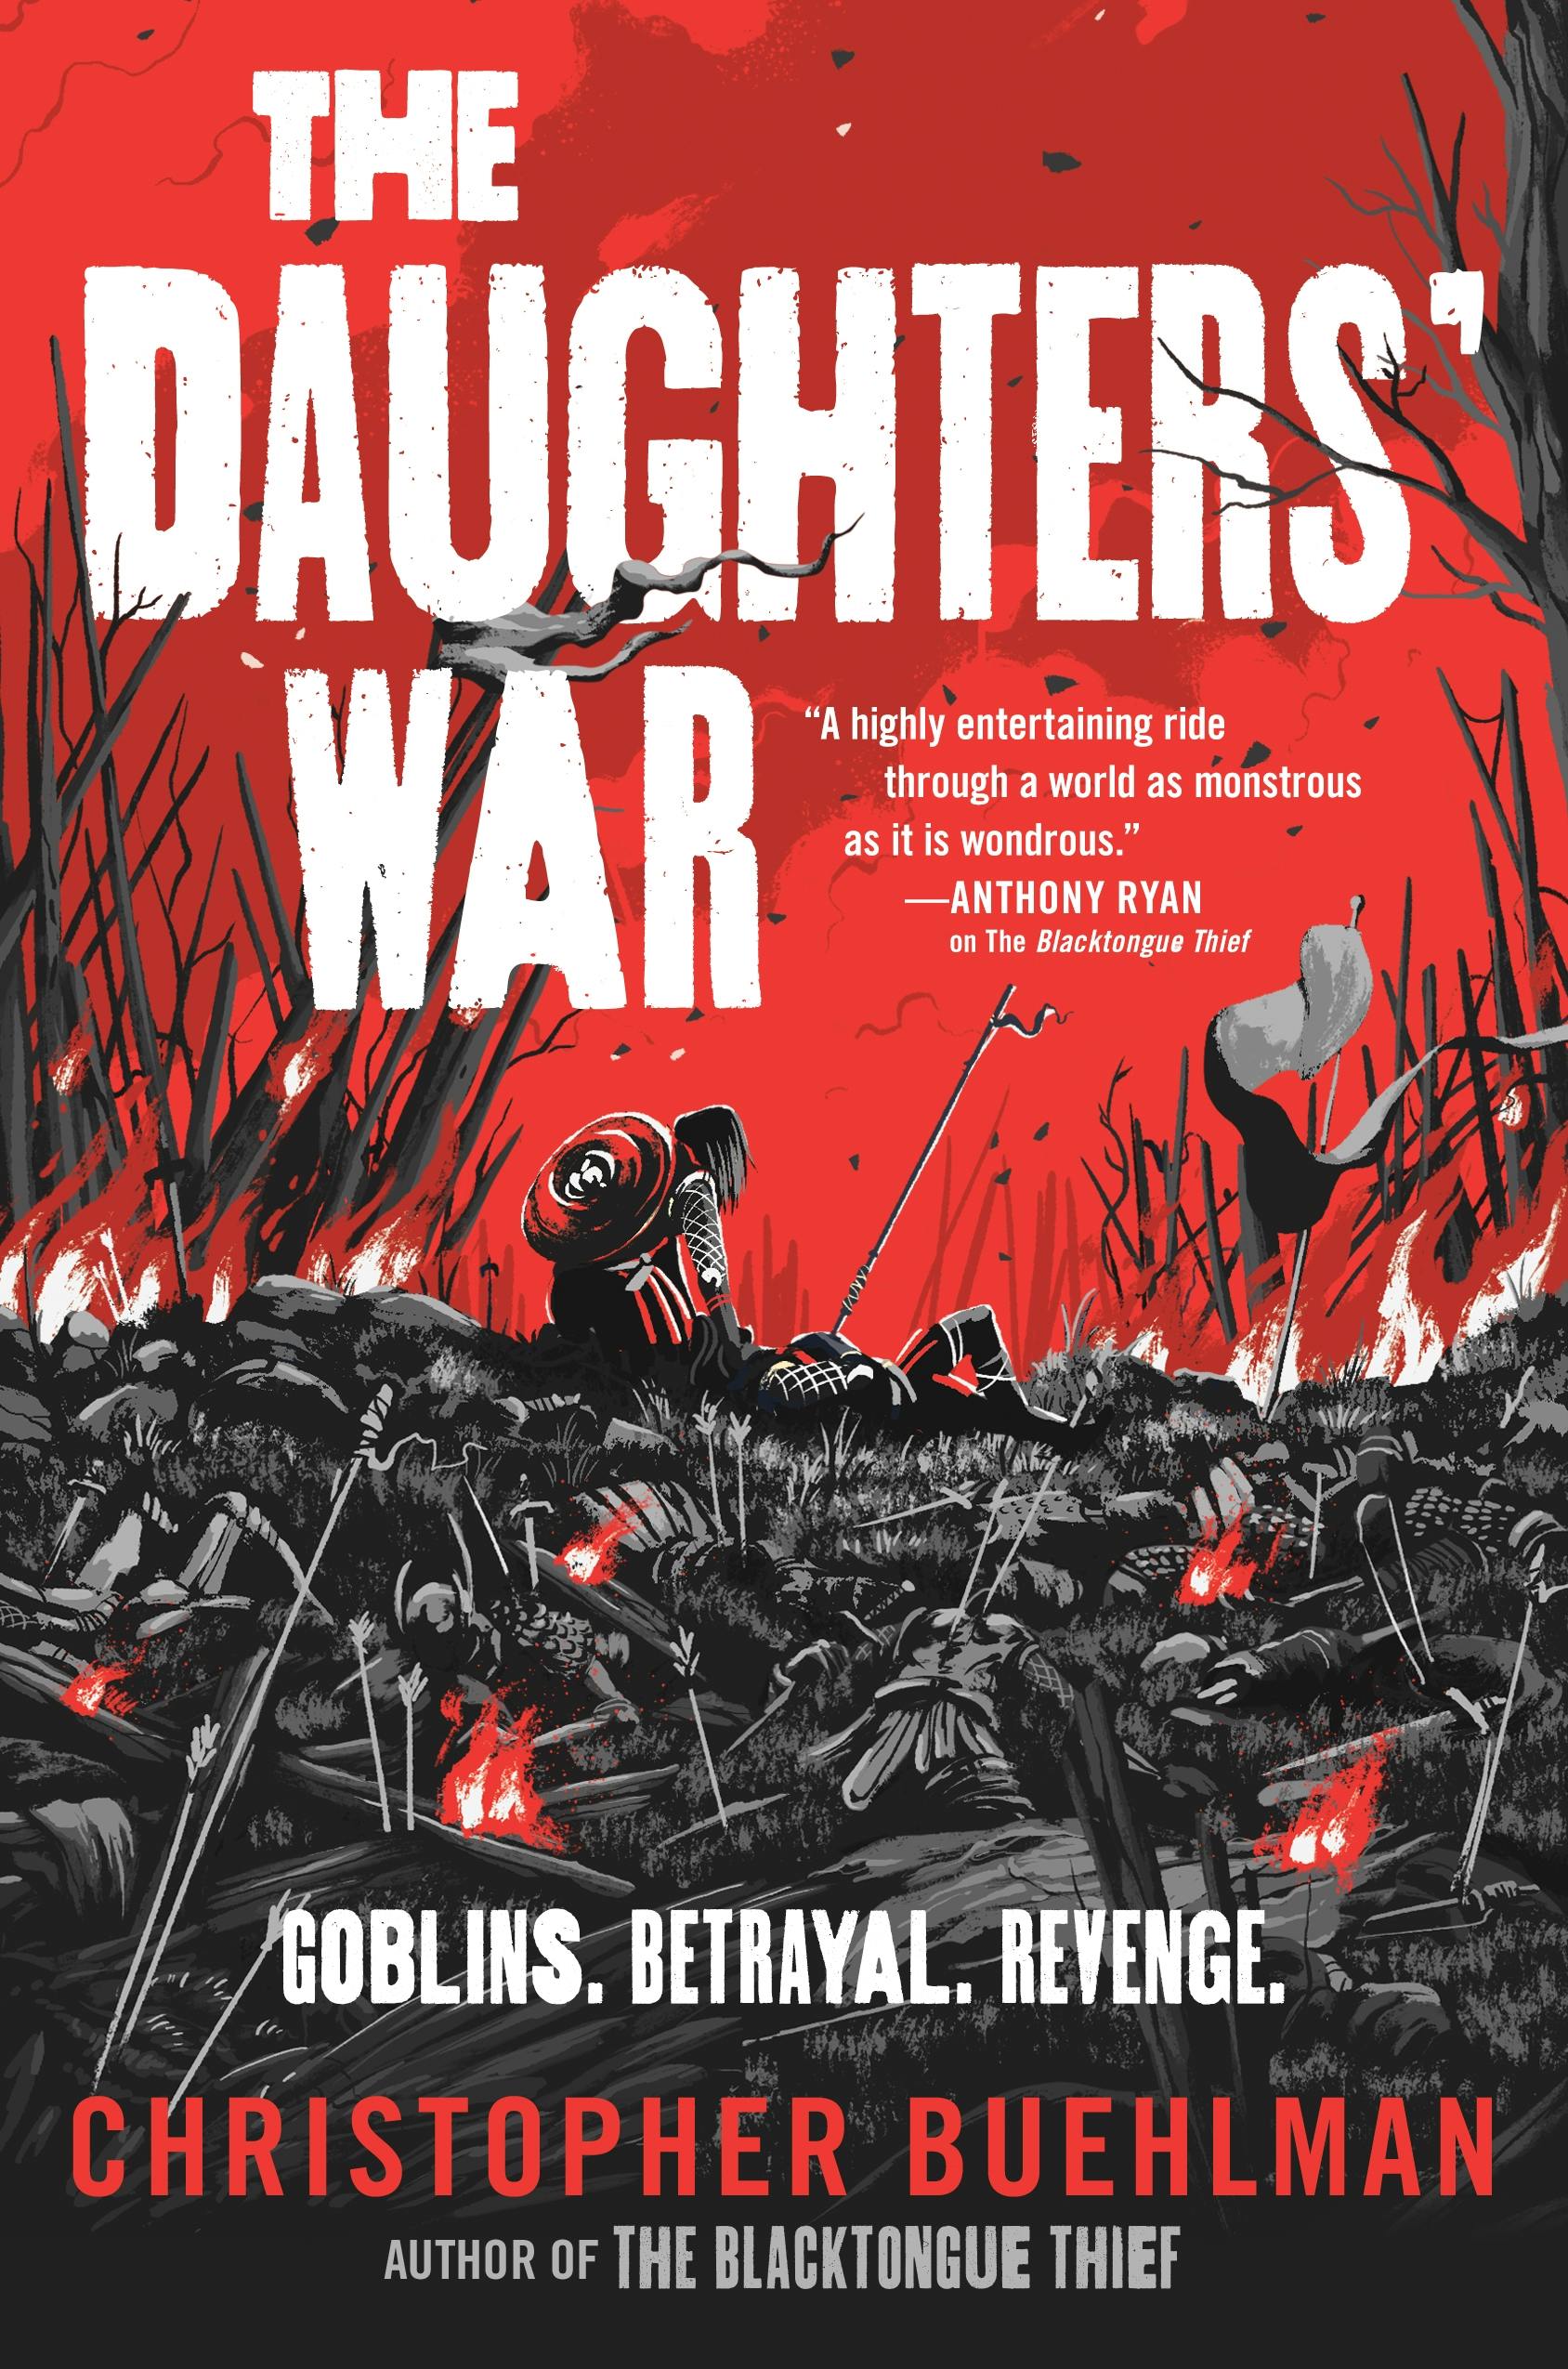 Cover for the book titled as: The Daughters' War